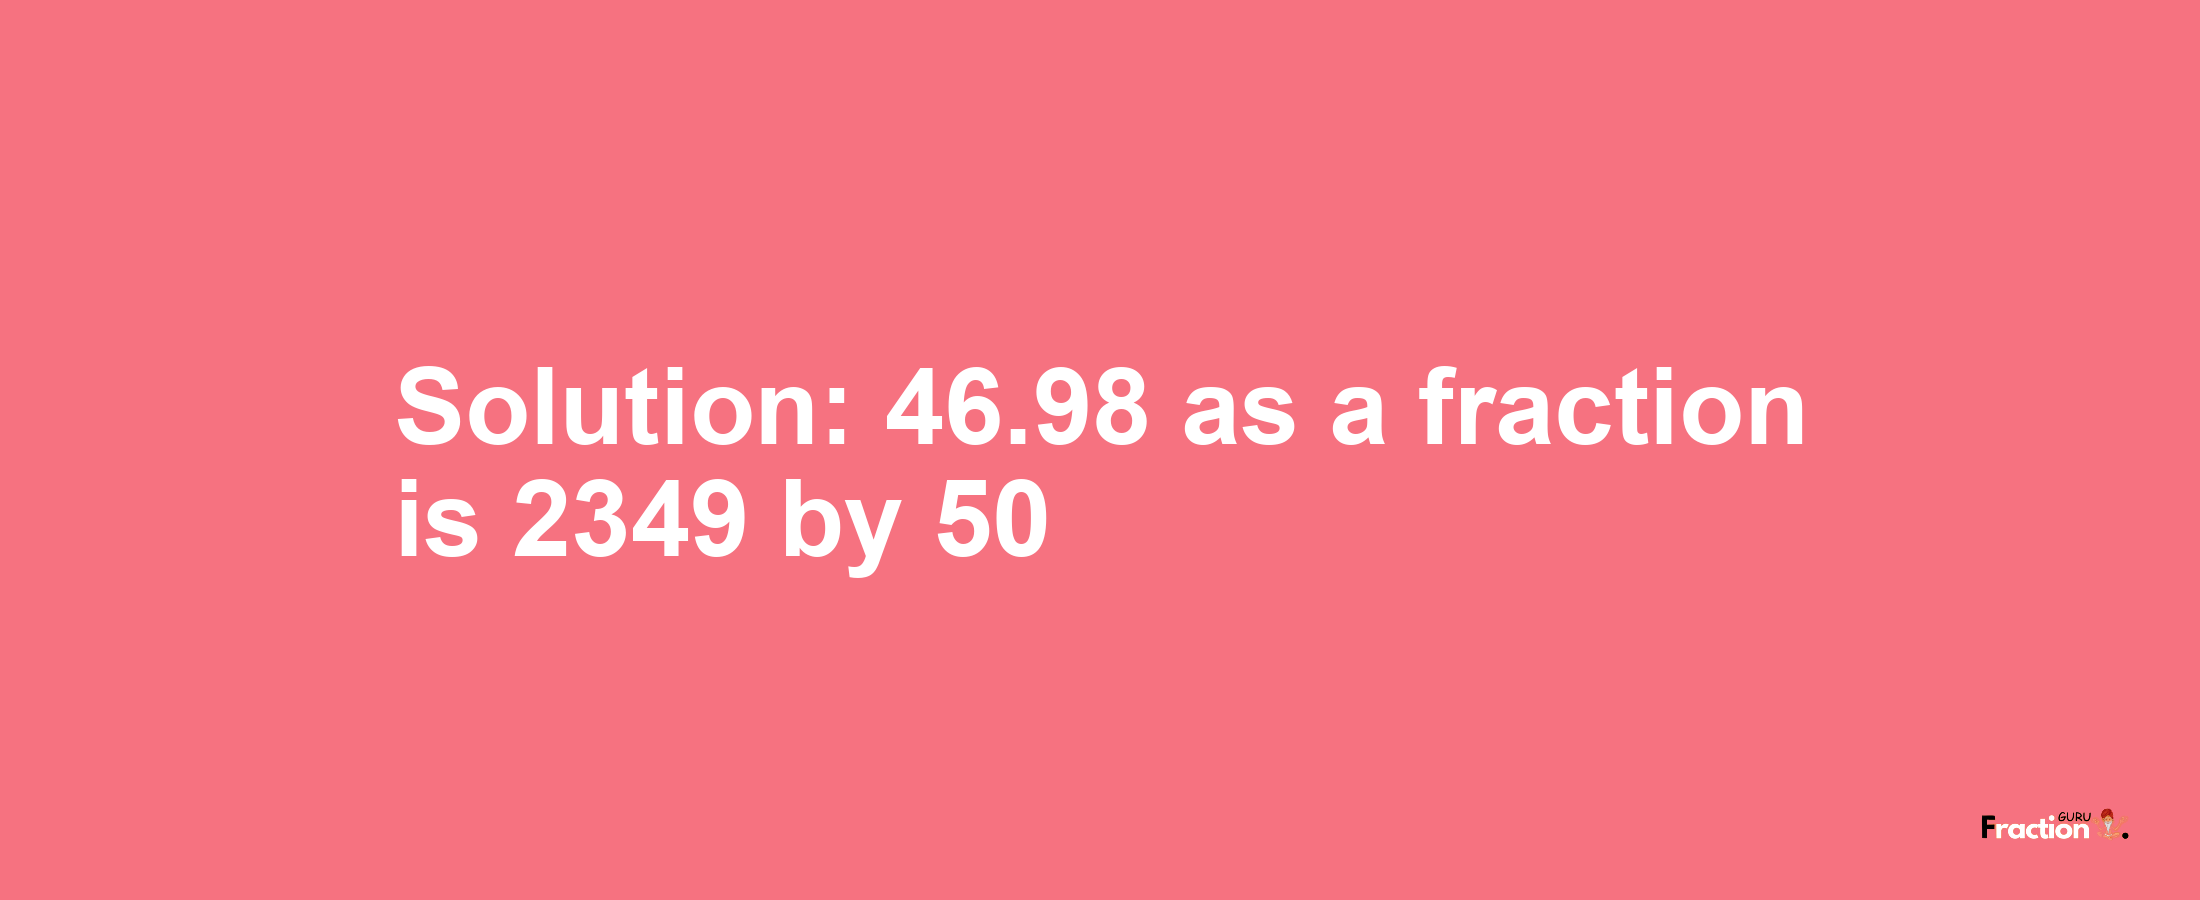 Solution:46.98 as a fraction is 2349/50